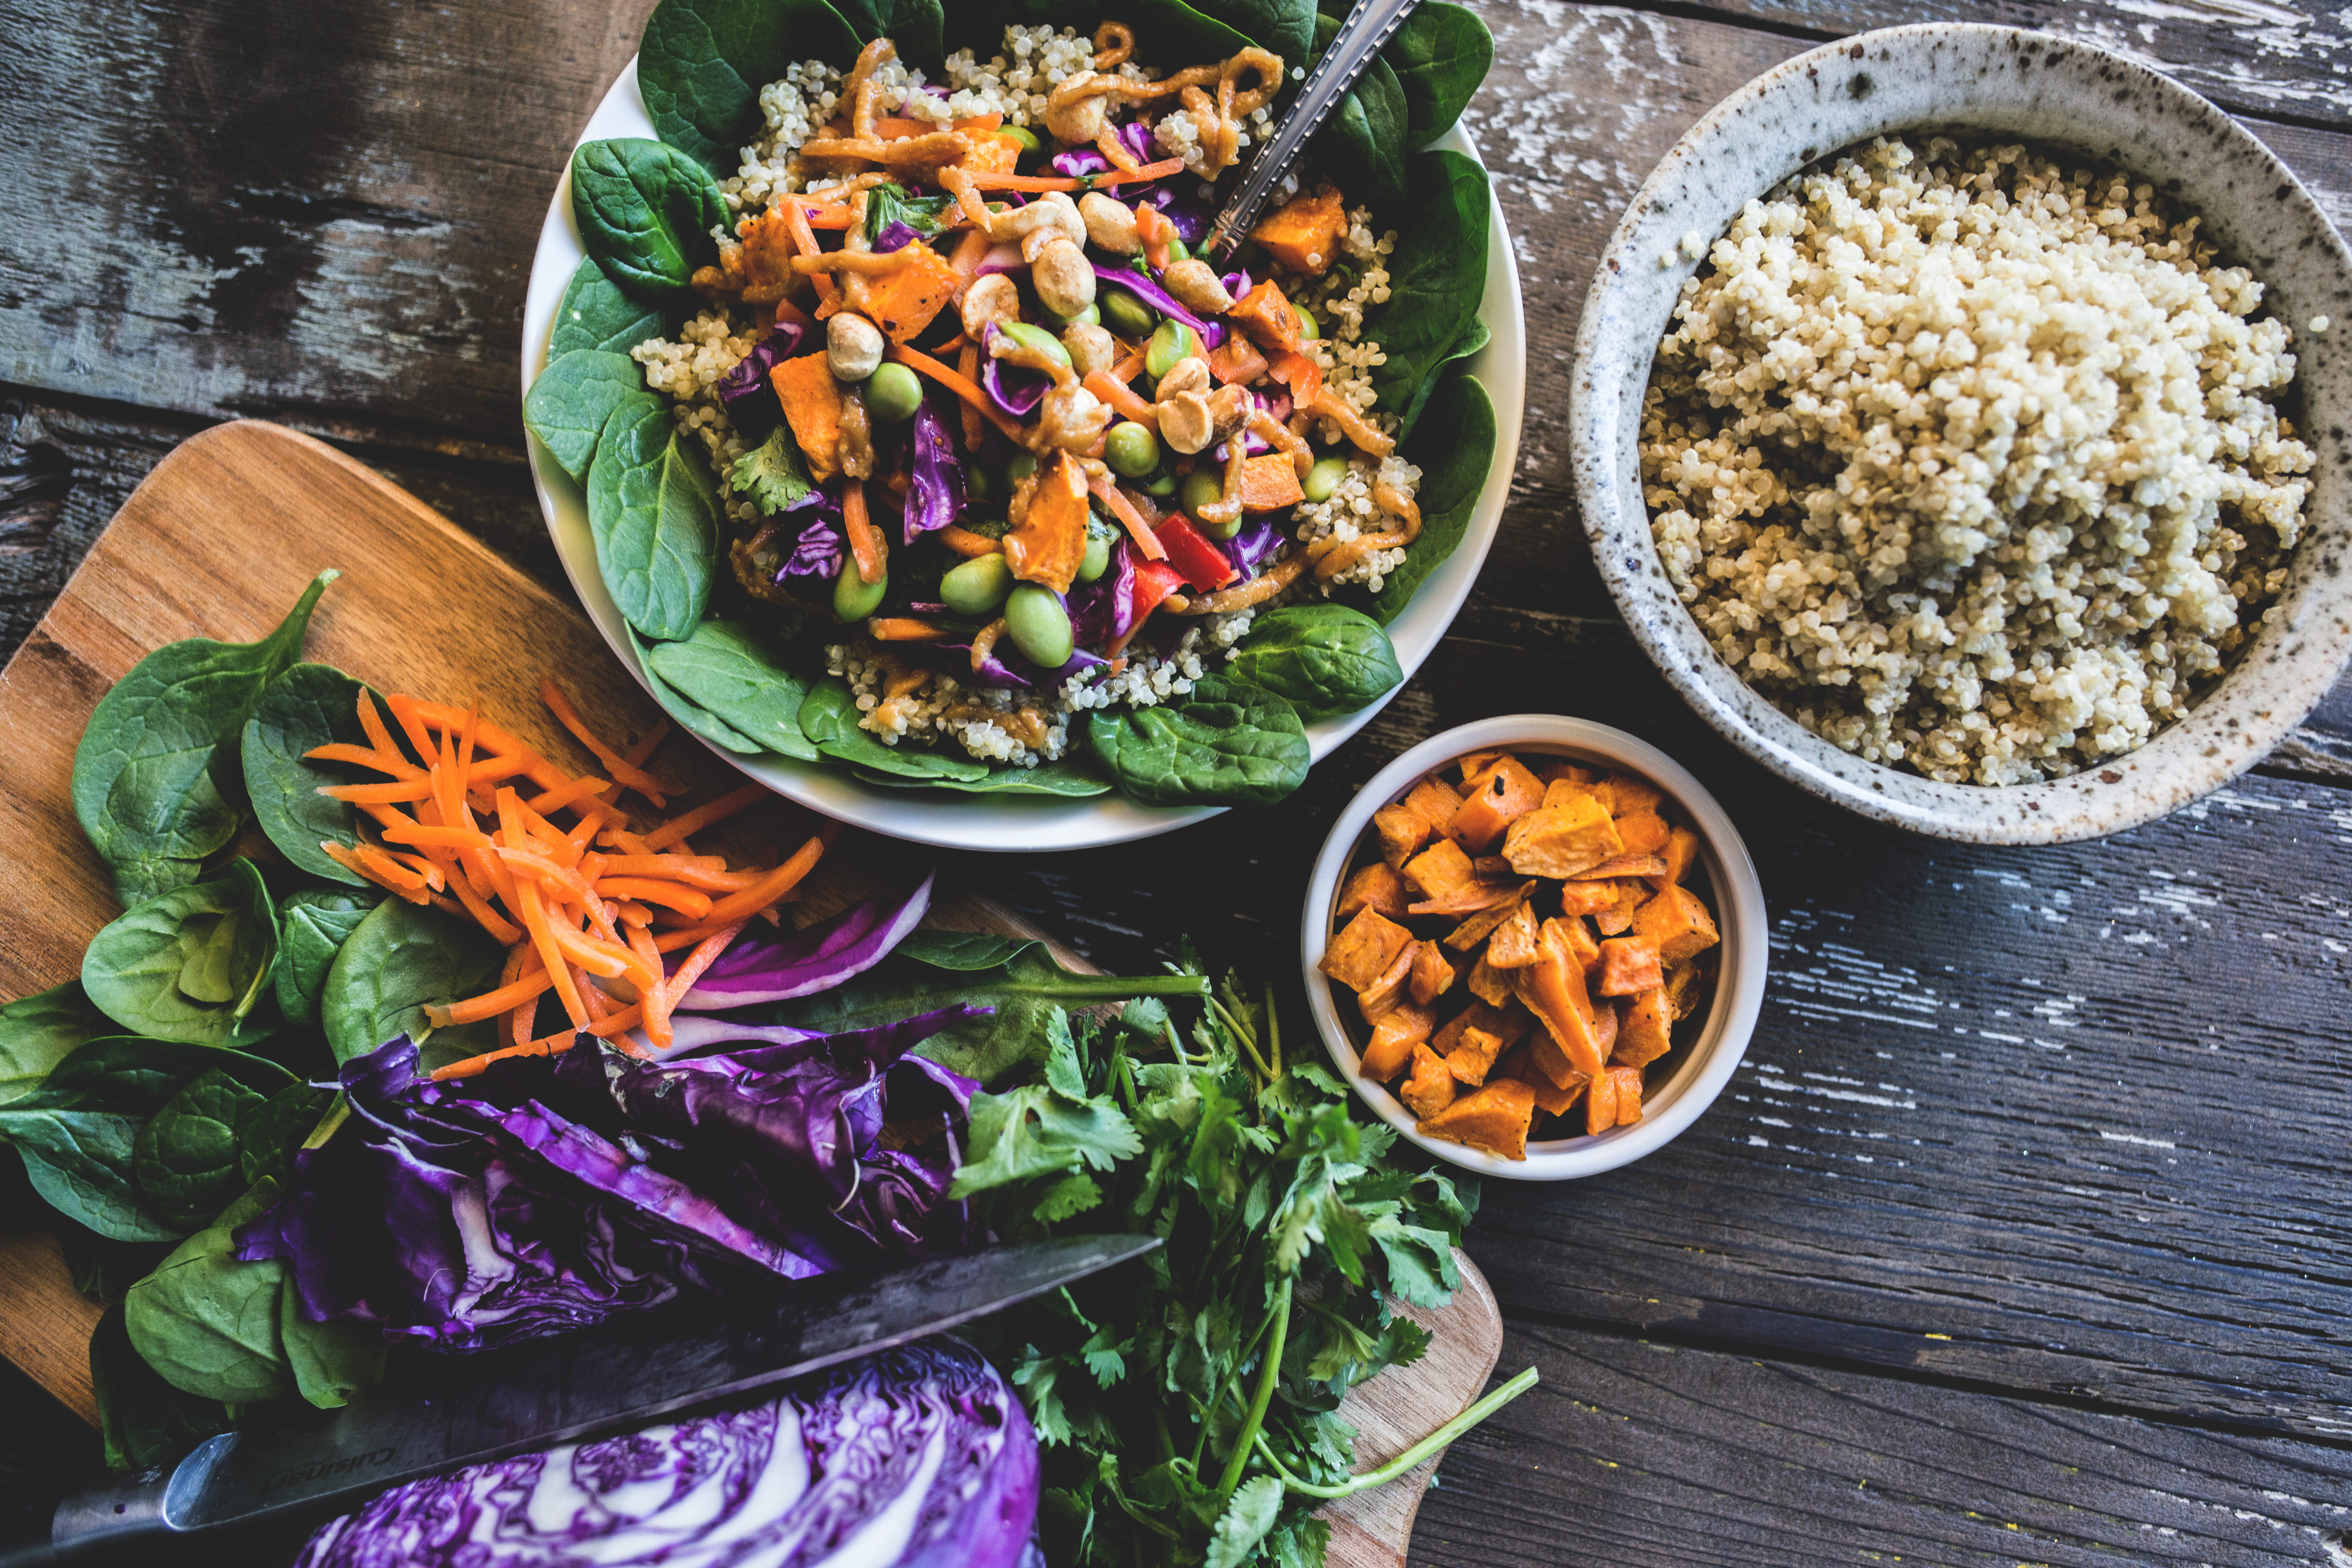 Colourful plant-based bowl with spinach, carrots, cabbage and coconut quinoa on a wooden table